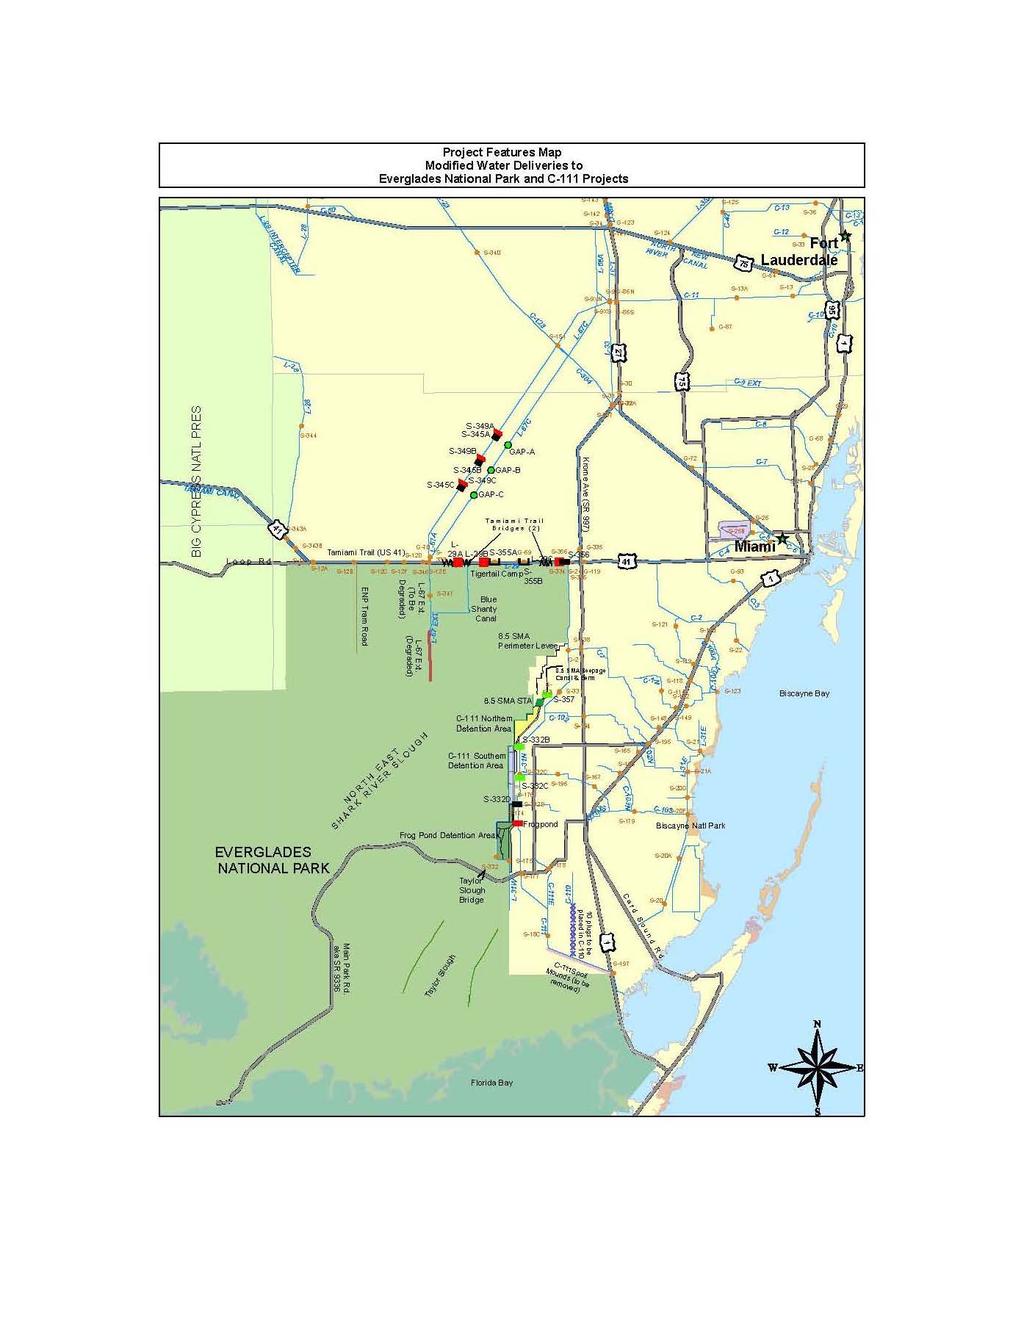 Project Features Map Modified Water Deliveries to Everglades National Park and C-111